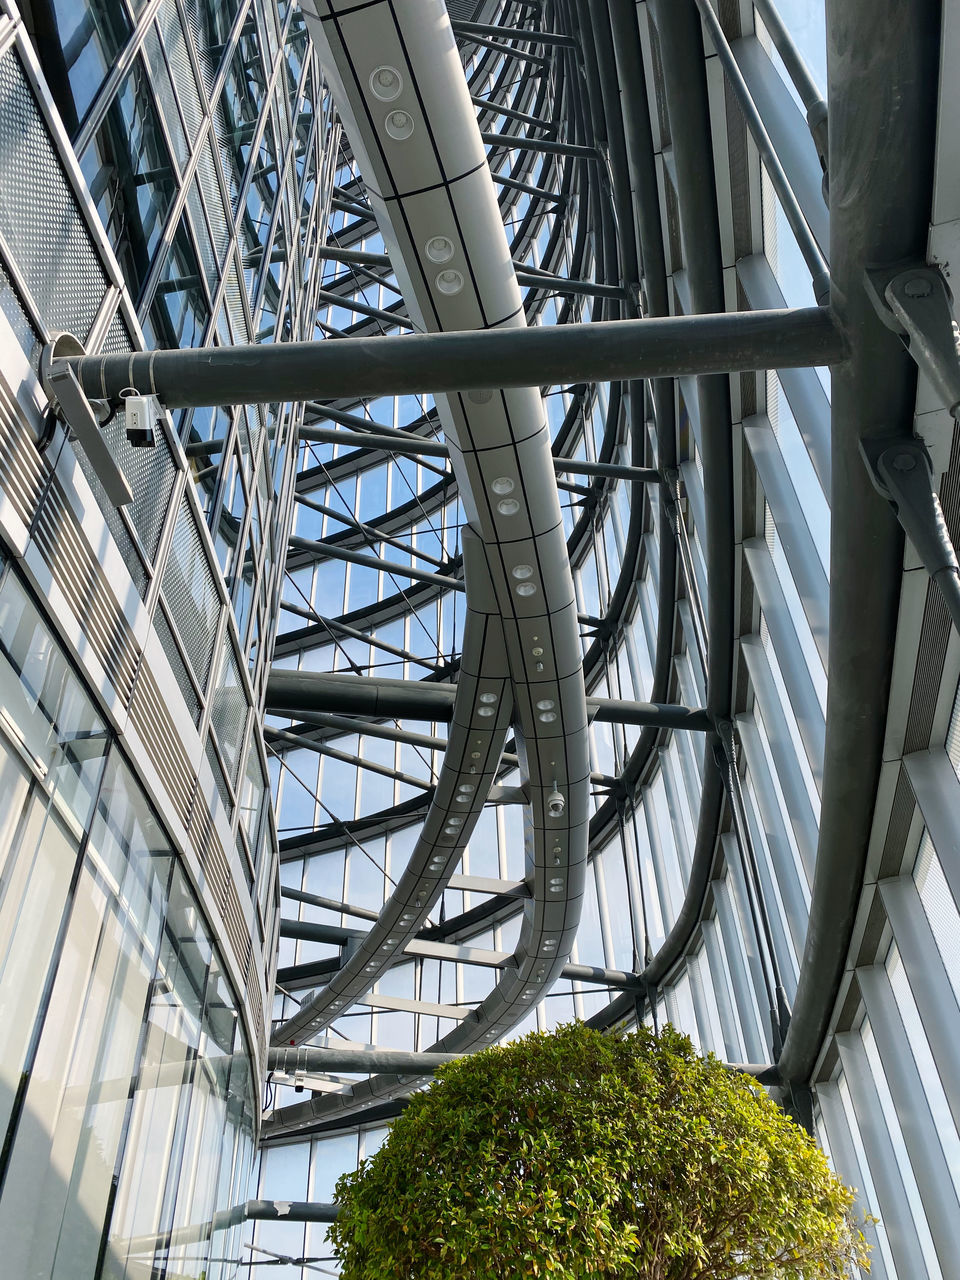 LOW ANGLE VIEW OF METAL BRIDGE AND PLANTS IN BUILDING